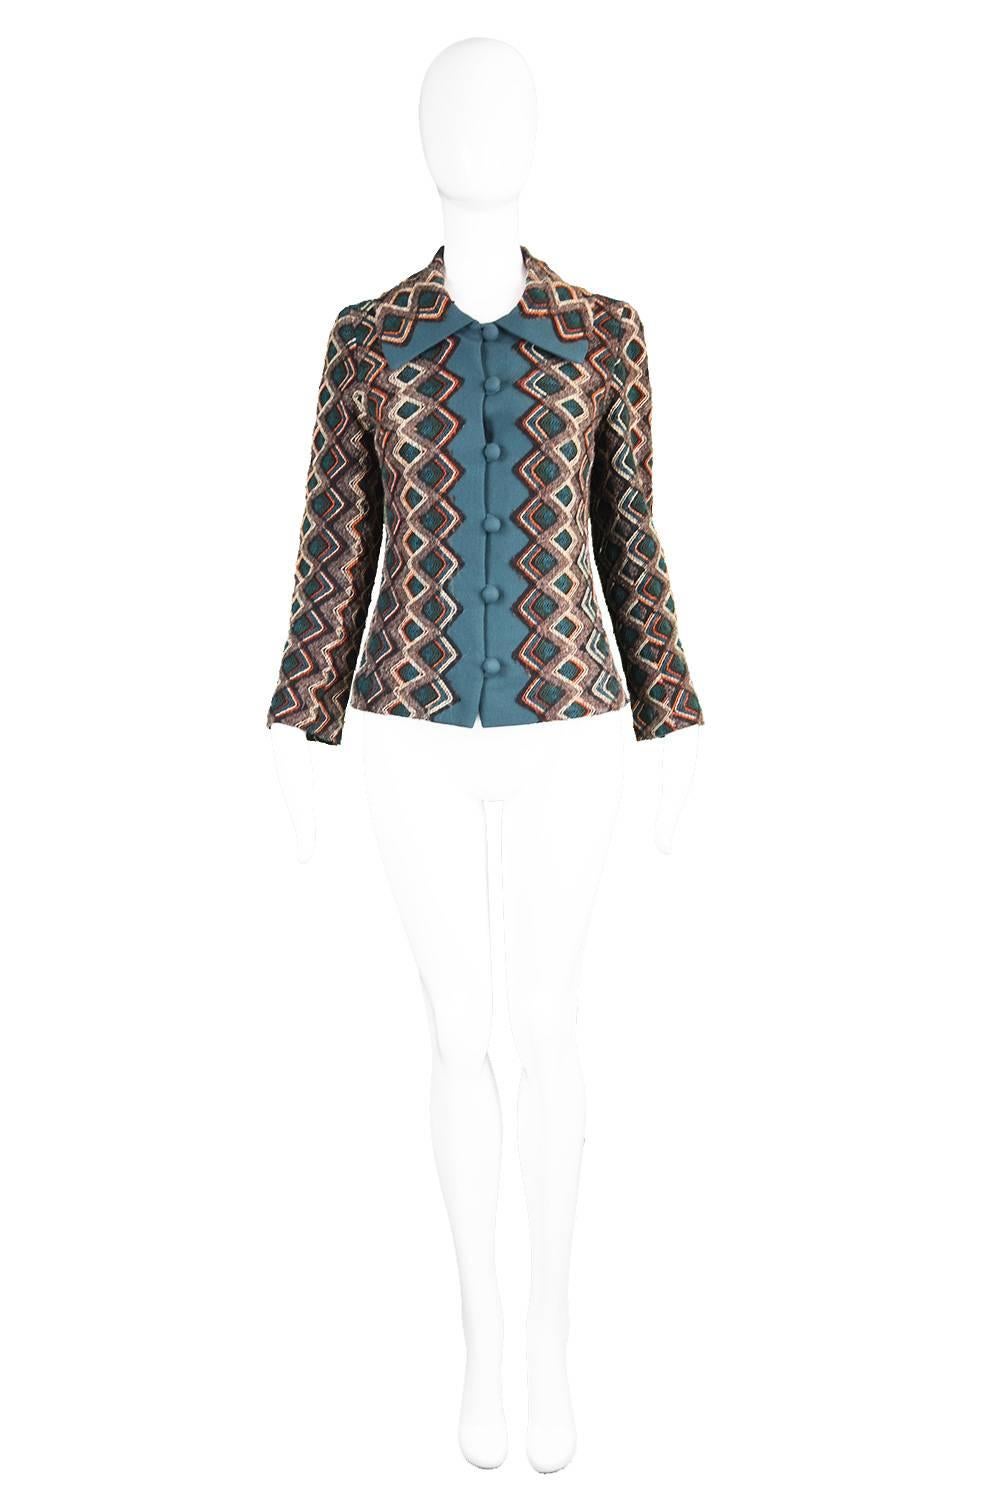 A chic vintage jacket from the 60s by British couturier and Royal dressmaker, Norman Hartnell for his 'Le Petit Salon' label. With a multicoloured, diamond-shaped woven wool tapestry style body and a wool crepe trim fabric on the collar, down the